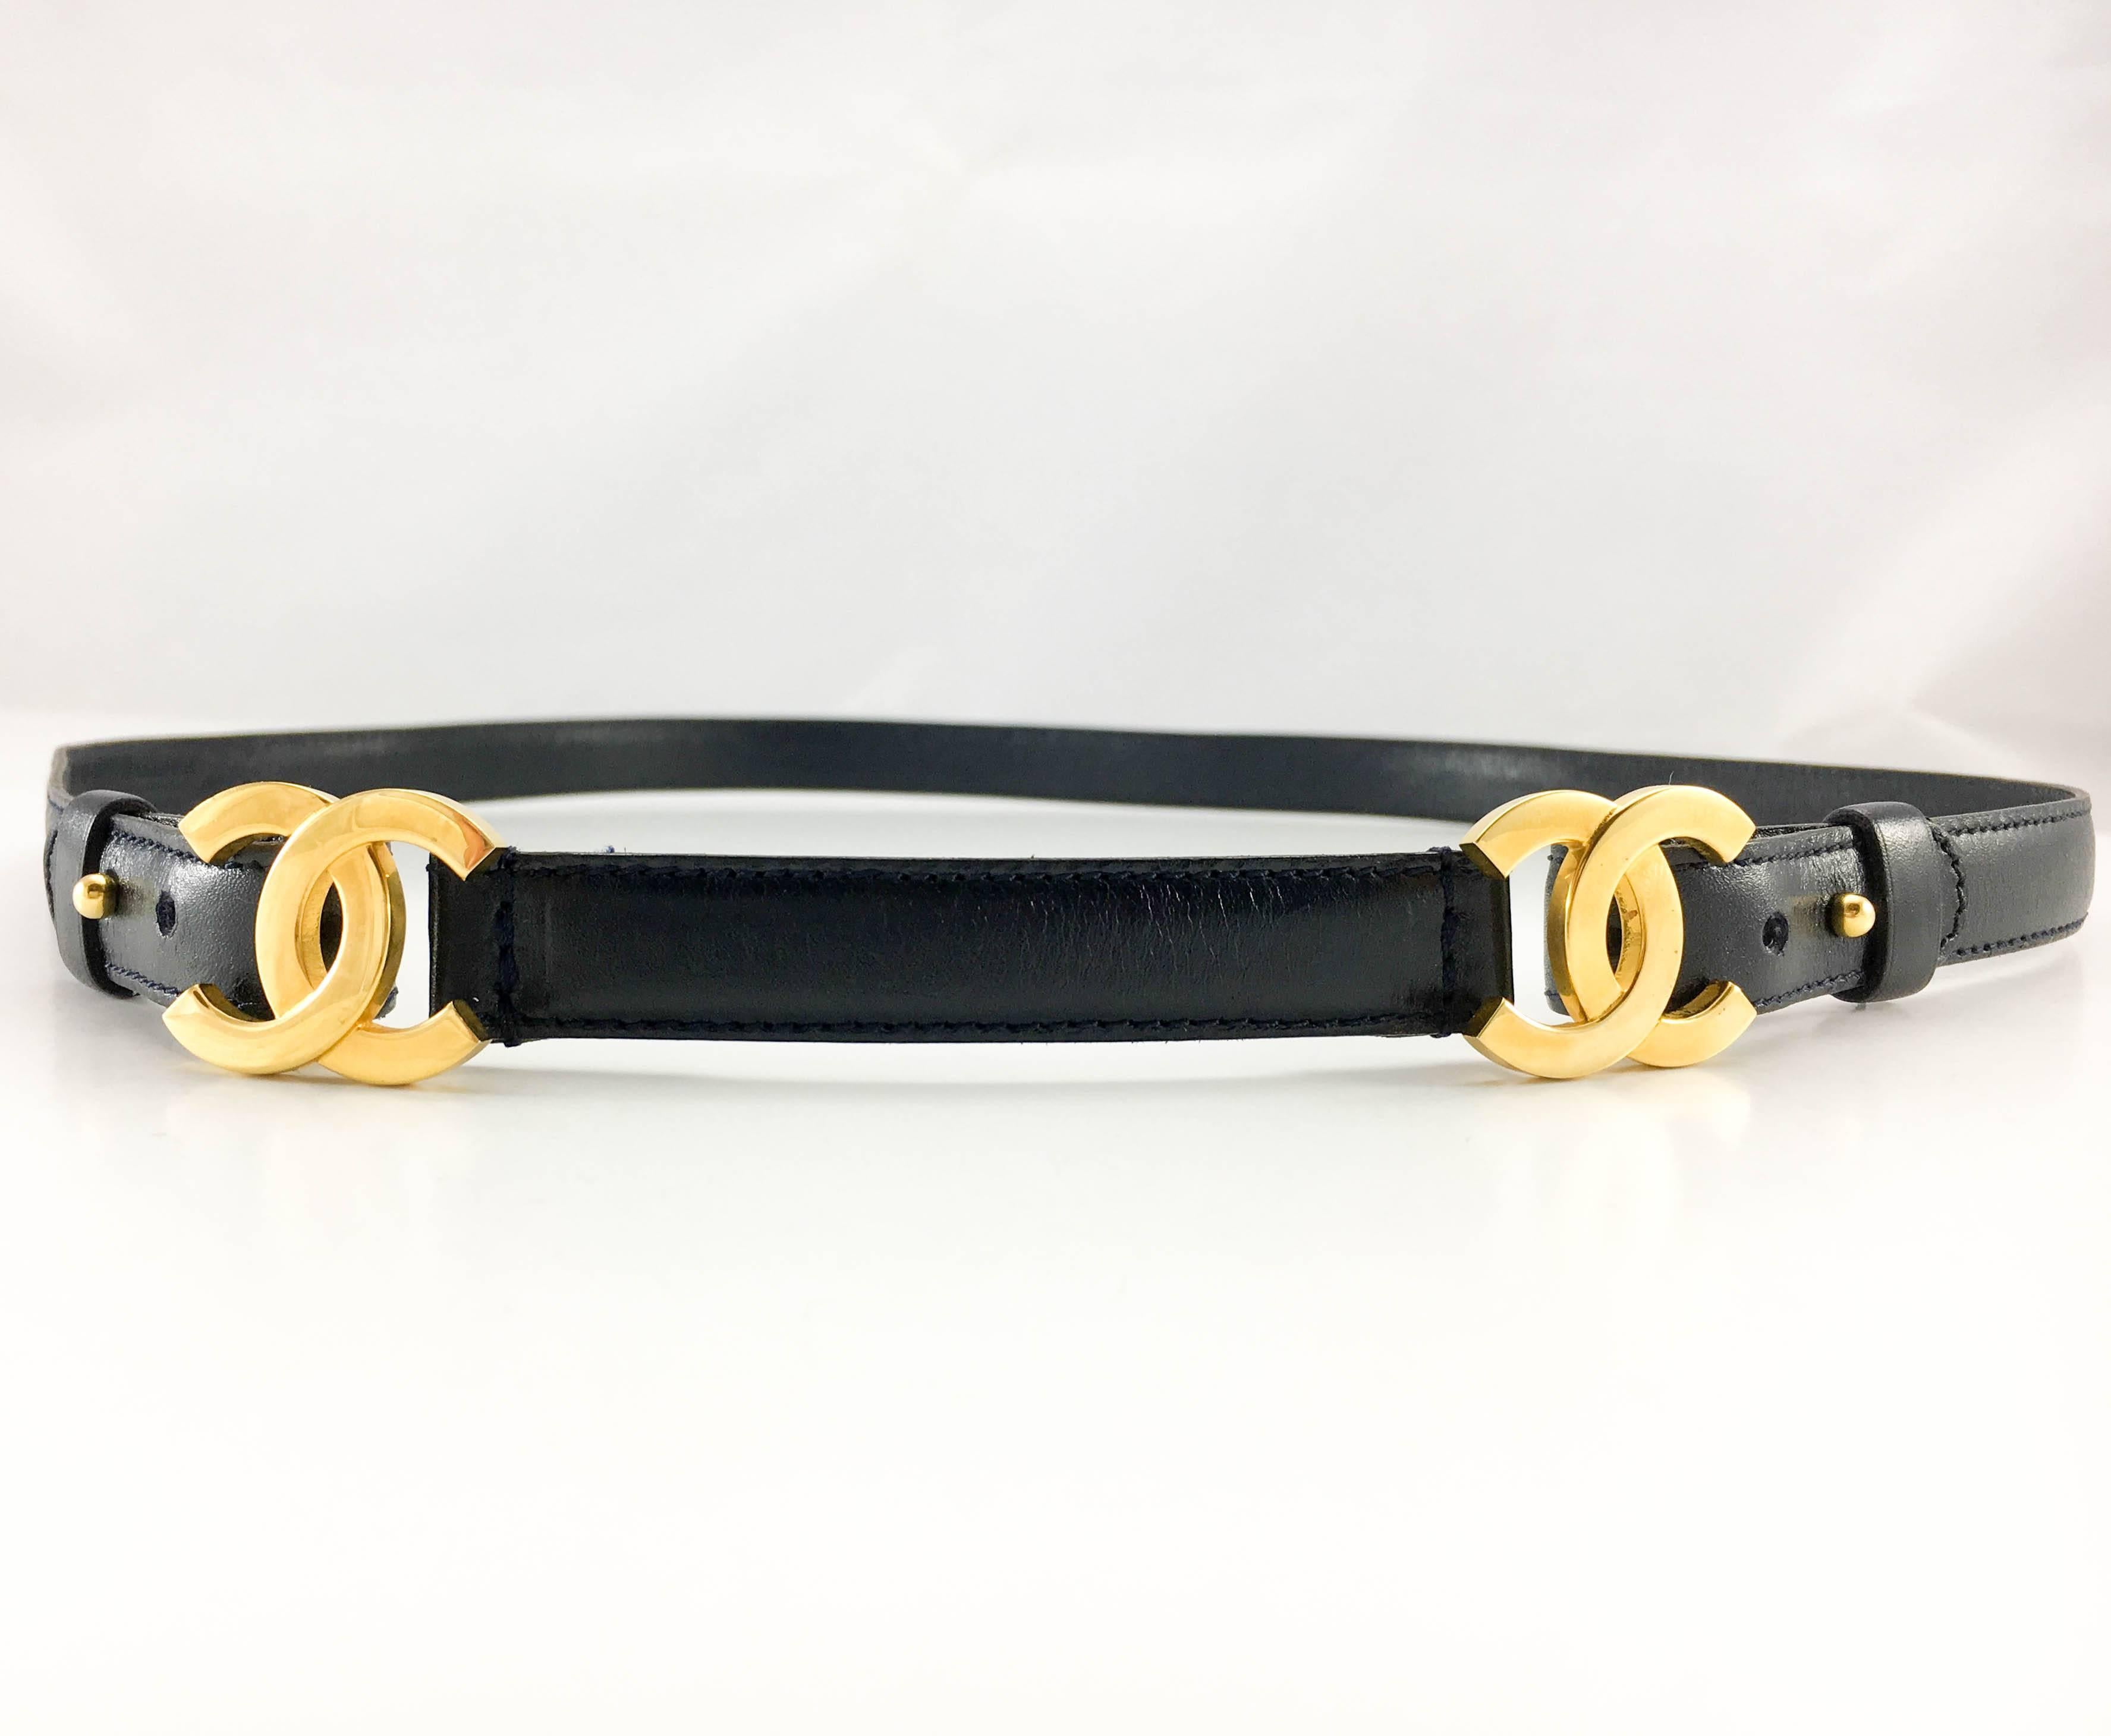 Chanel Navy Leather and Gilt Logo Belt. This delicate and stylish thin belt by Chanel is an understated way to add a dash of fashion glamour to a look. In navy blue leather, it features 2 gilt ‘CC’ logo buckles. 

Label / Designer: Chanel

Period: